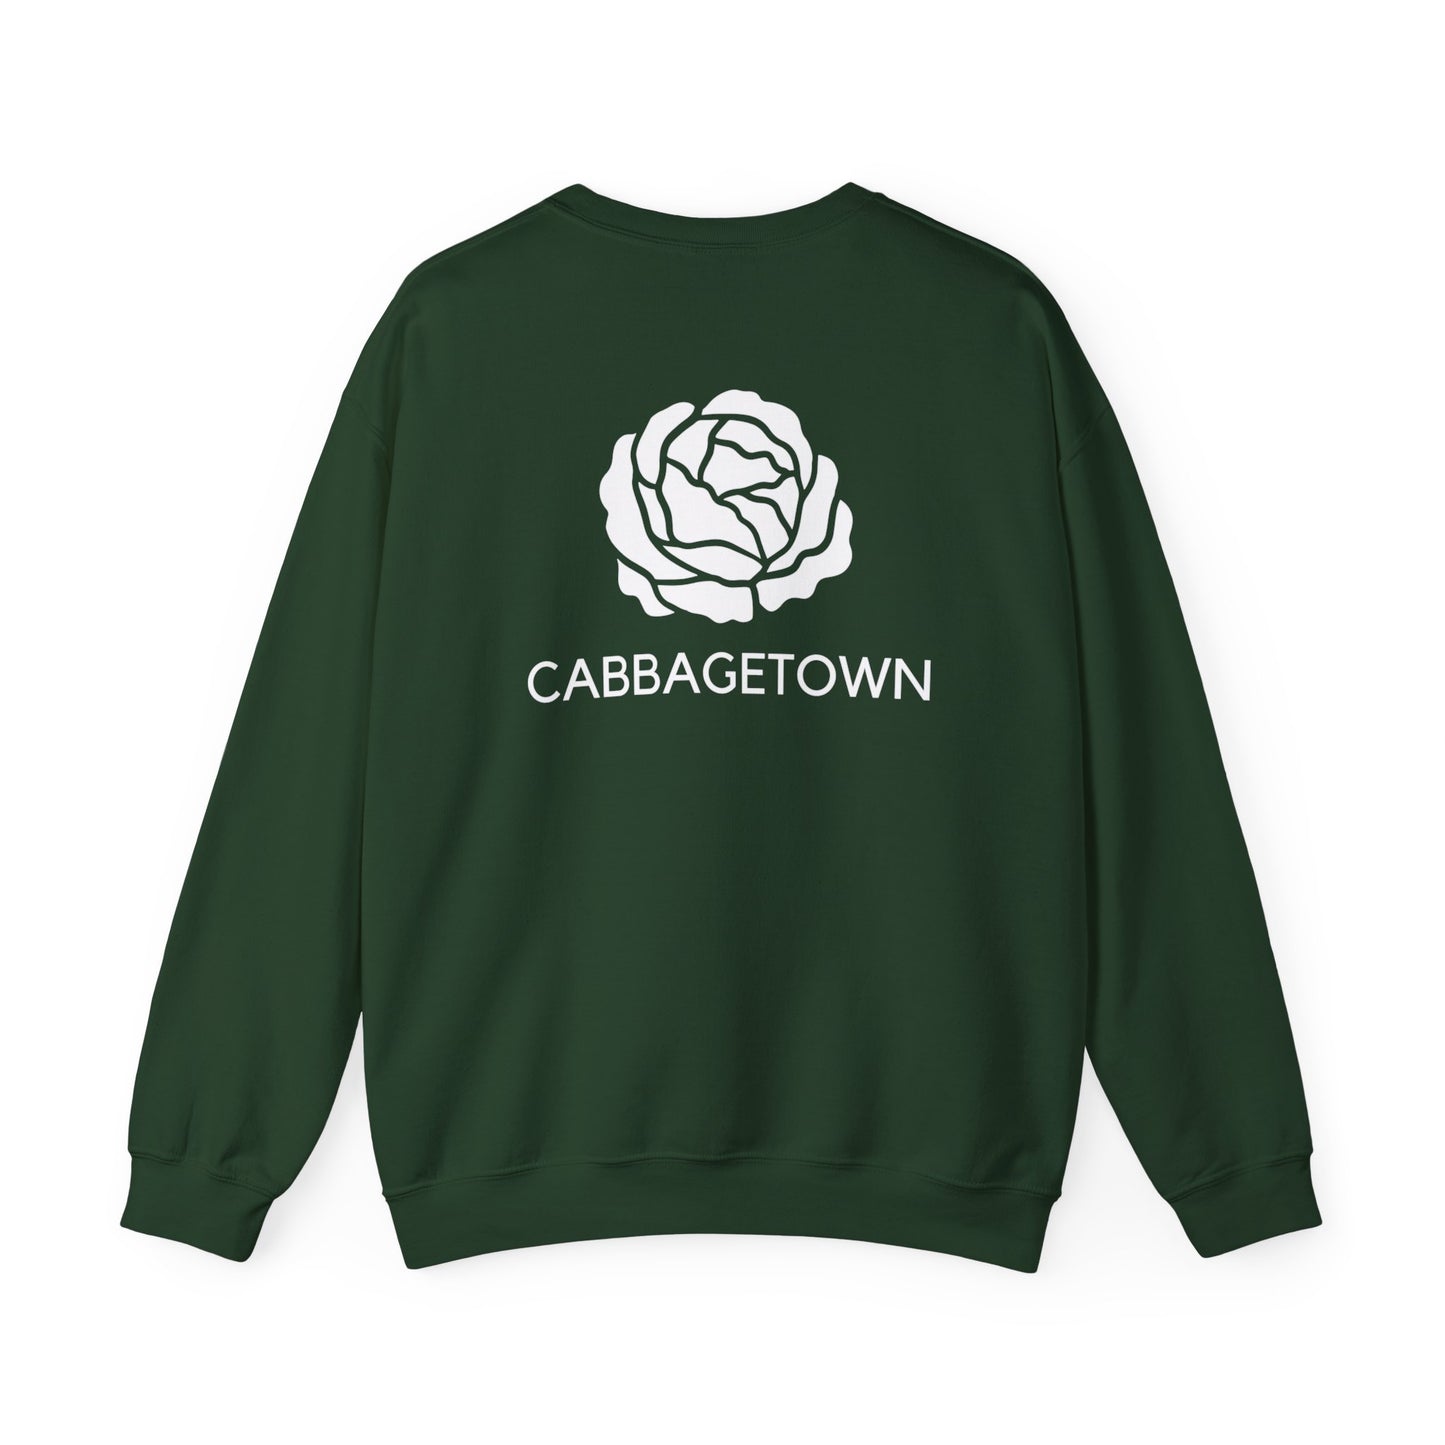 A Unisex Heavy Blend™ Crewneck Monochrome Logo and Cabbagetown Sweatshirt displayed on a white background with a white stylized cabbage design and the text "CABBAGETOWN TORONTO" printed below it, brought to you by Printify.